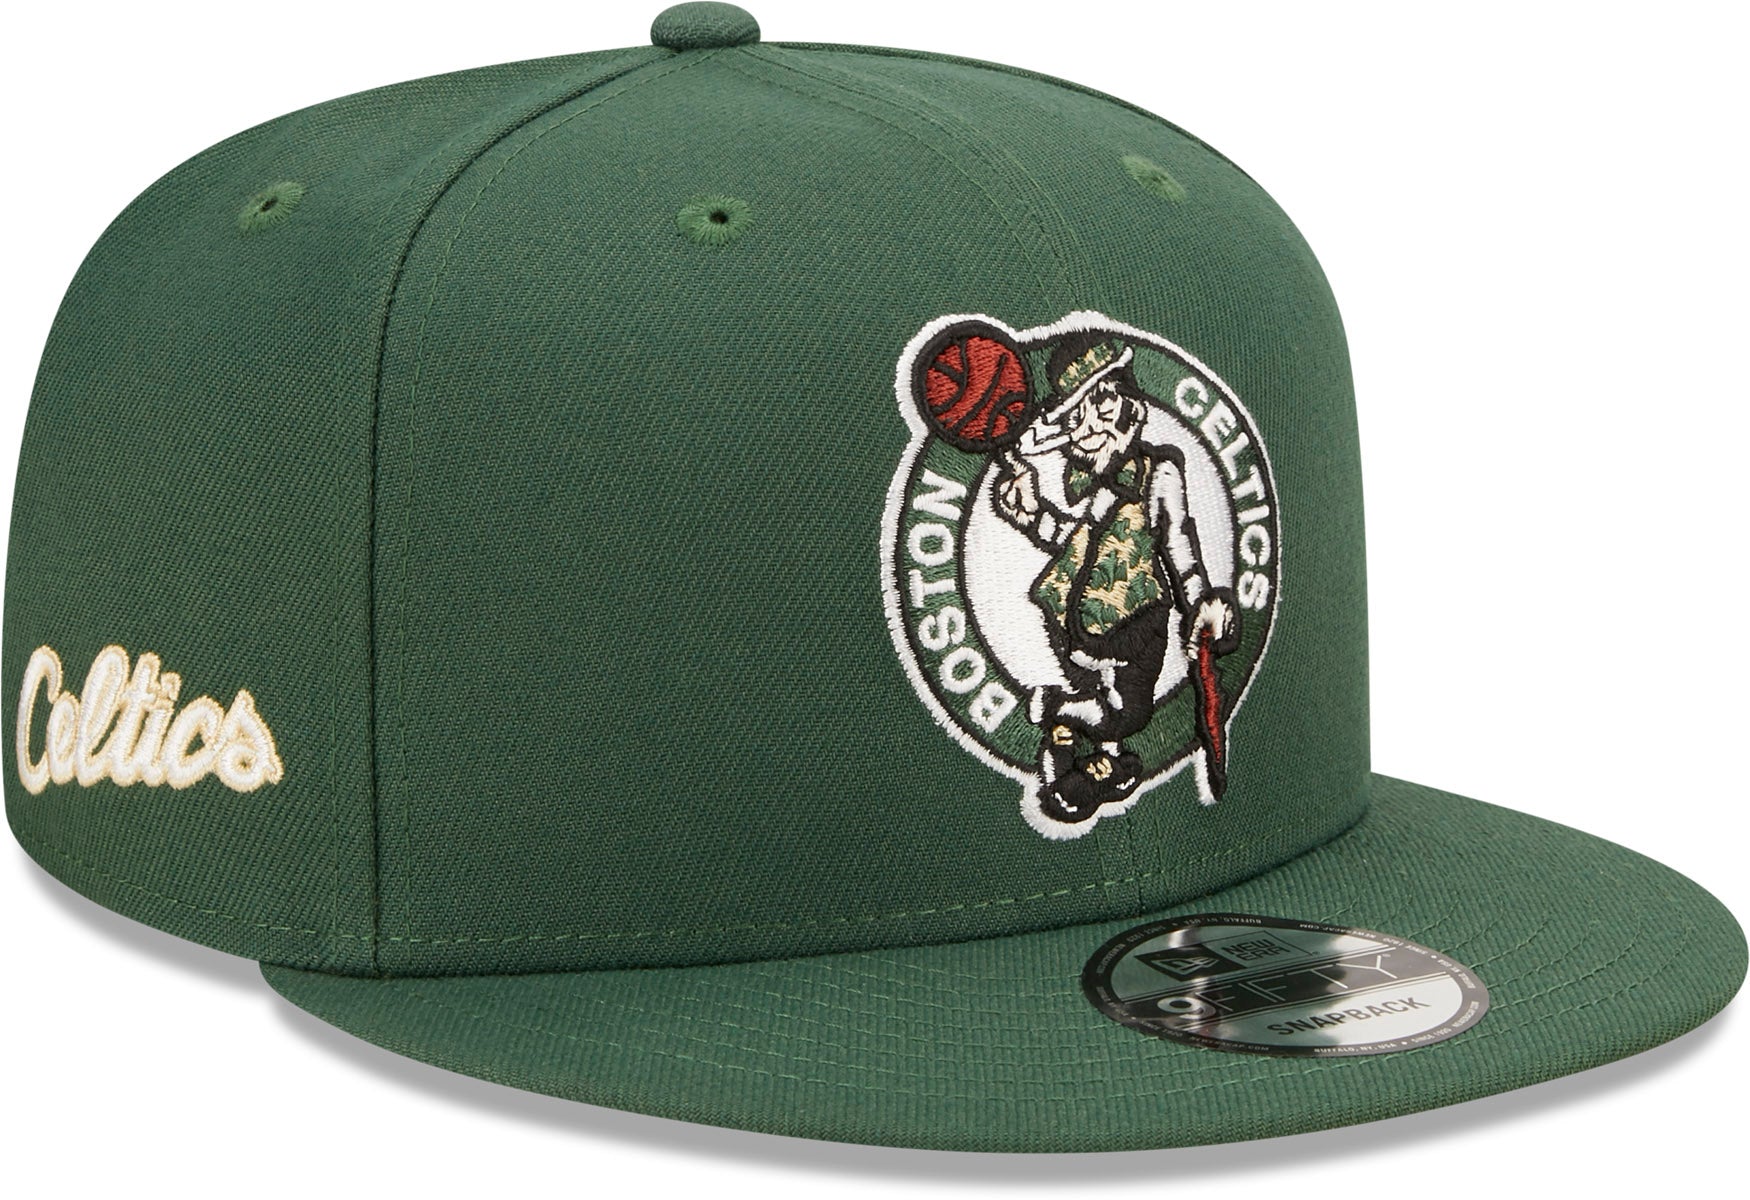 New Era 9FIFTY Fitted Boston Celtics Authentic Snapback Hat